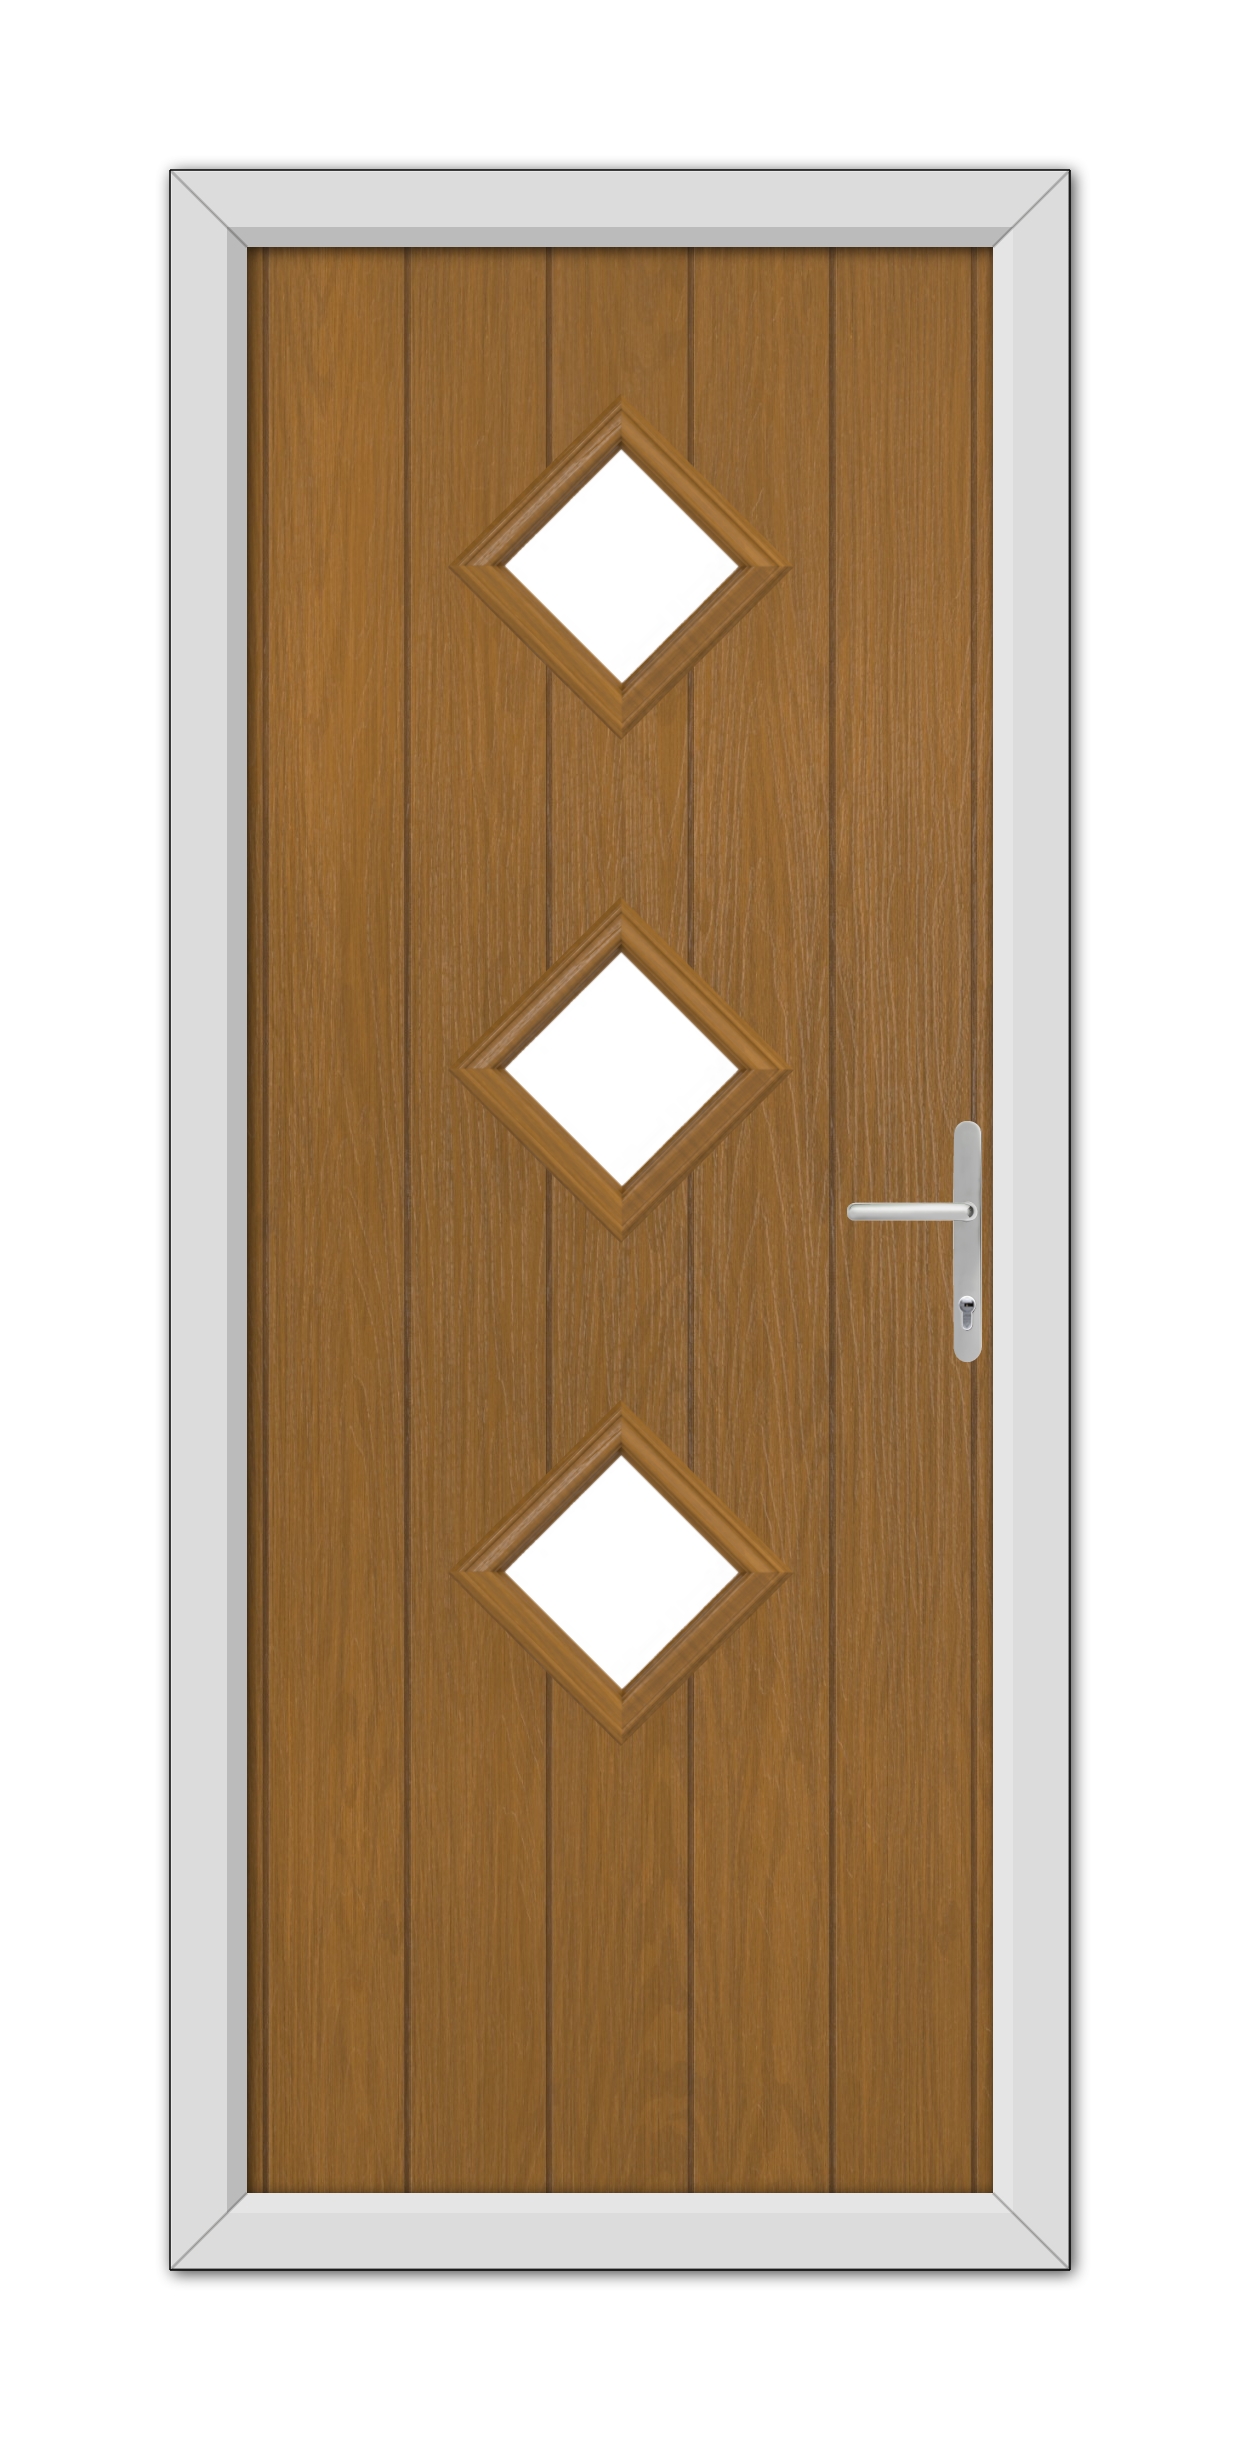 Oak Richmond Composite Door 48mm Timber Core with a white frame, featuring three diamond-shaped windows and a silver handle on the right side.